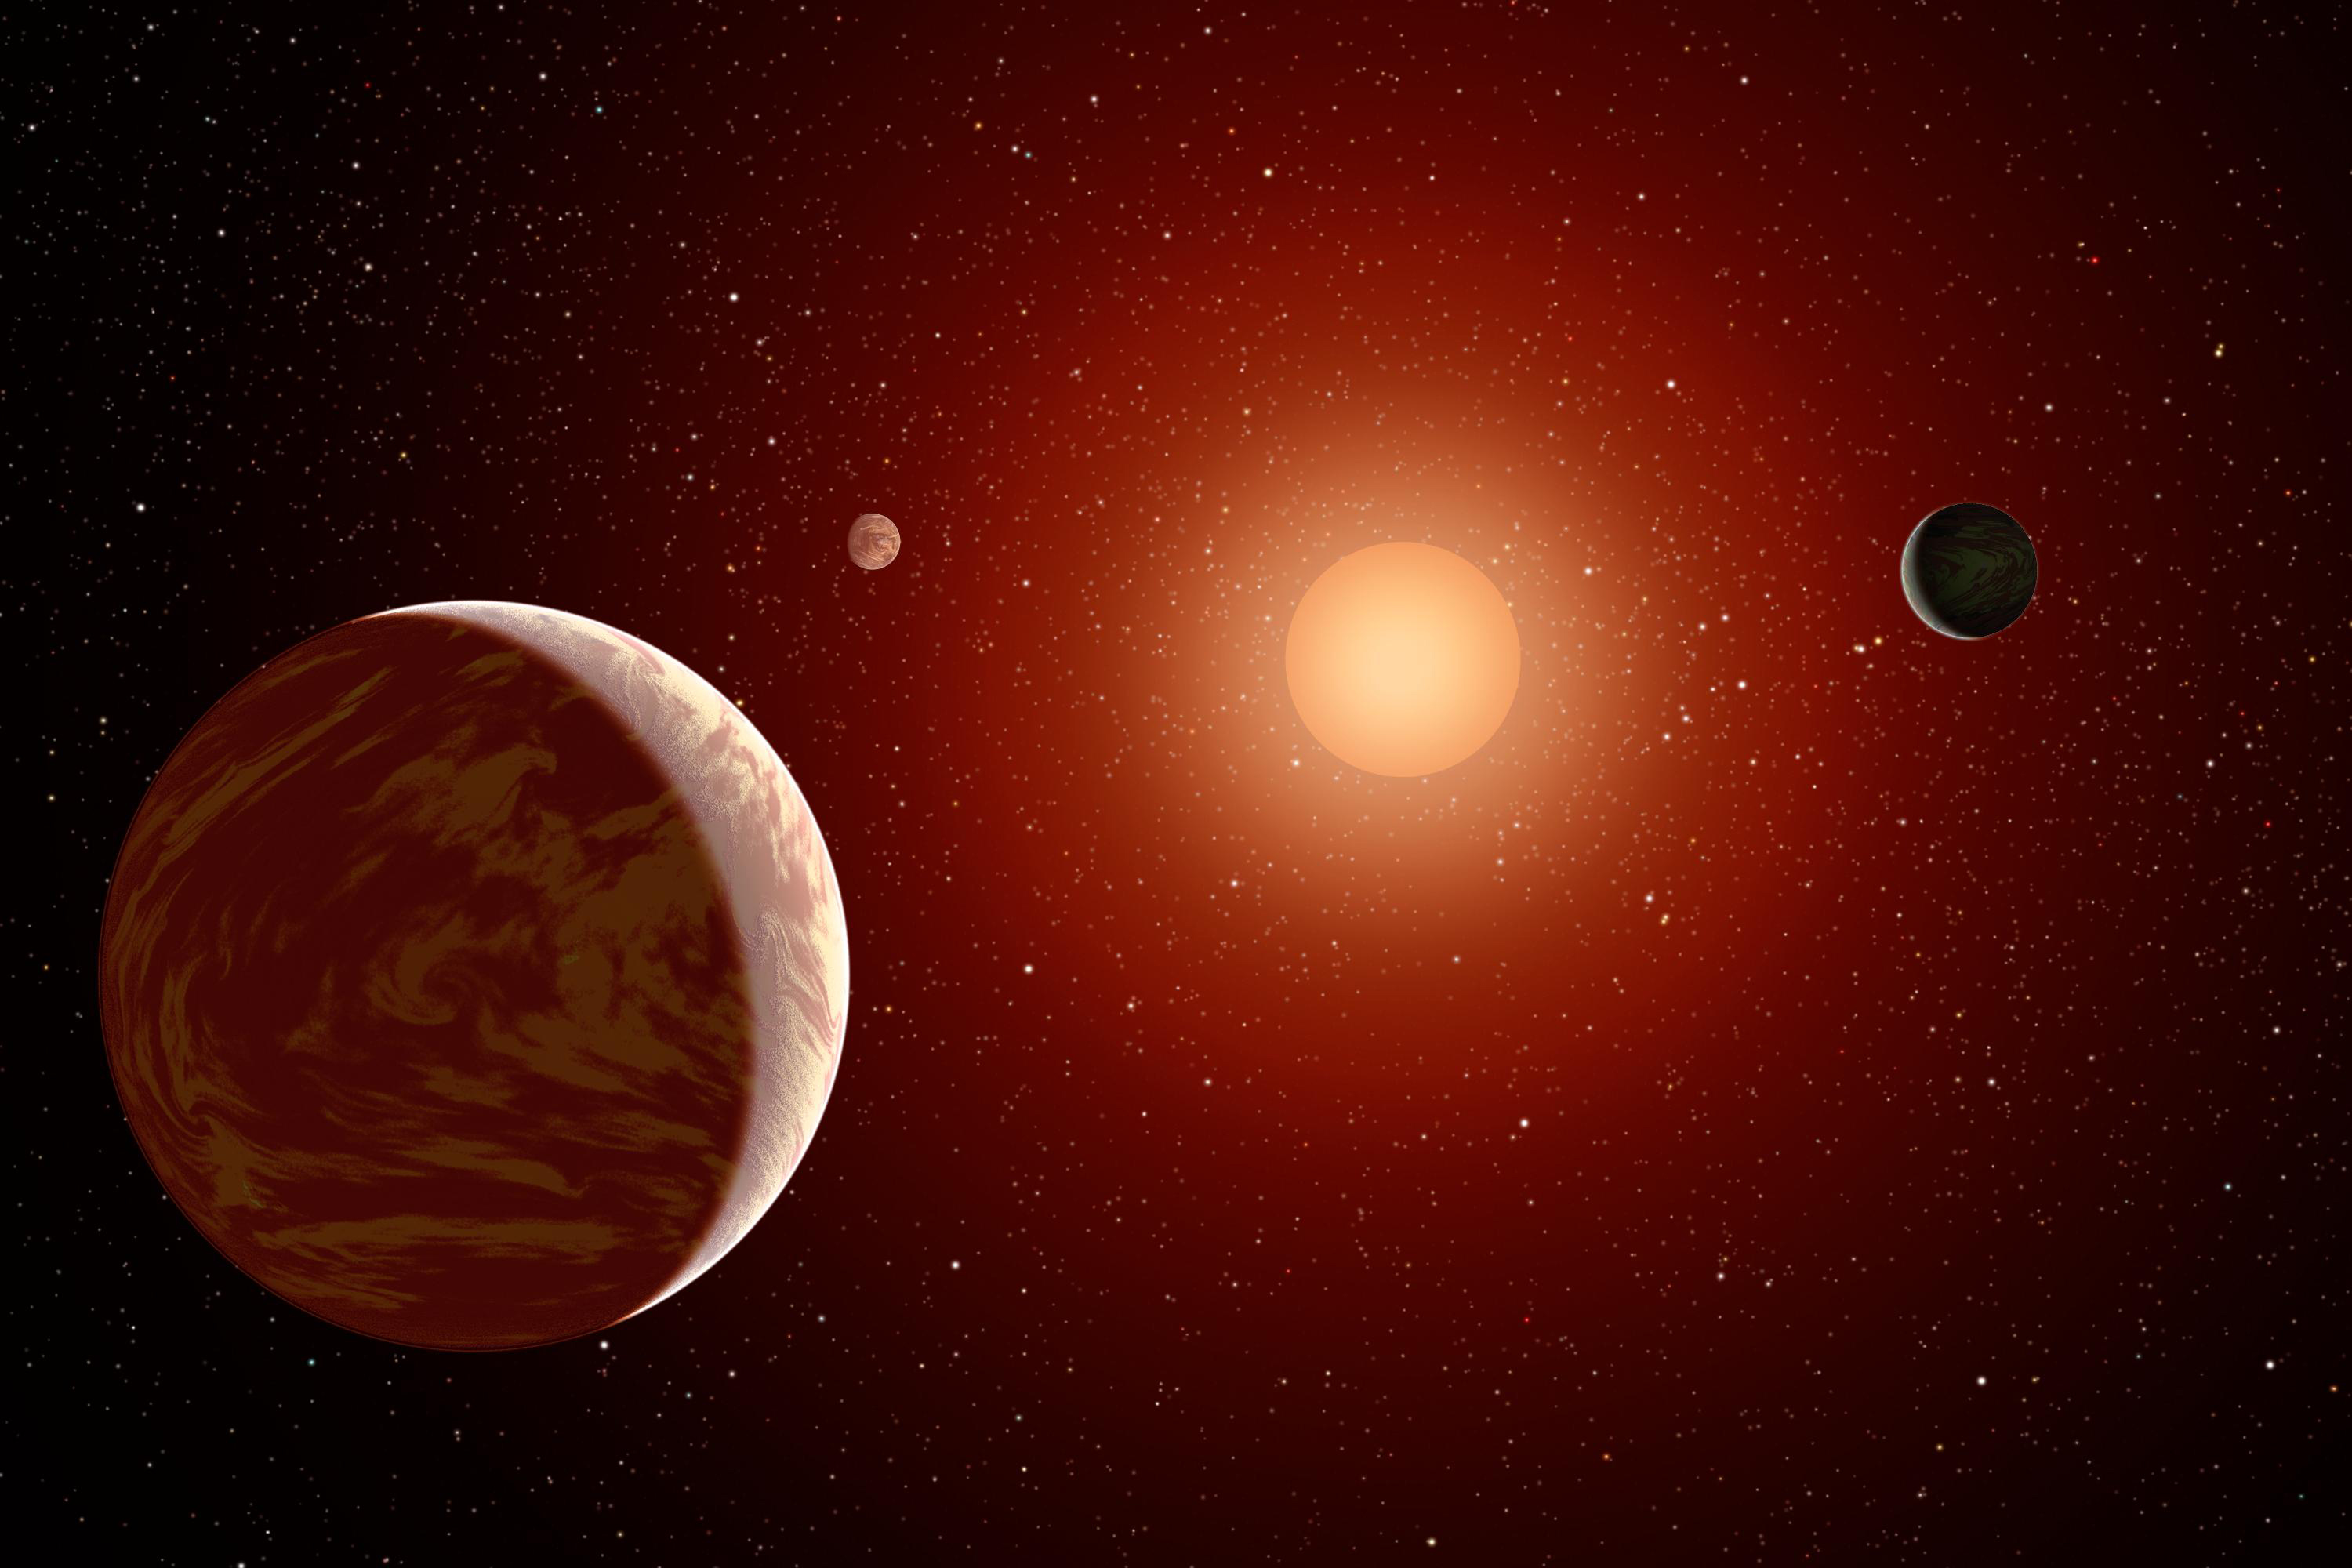 Artist’s depiction of a red, M-dwarf star with three exoplanets orbiting it.